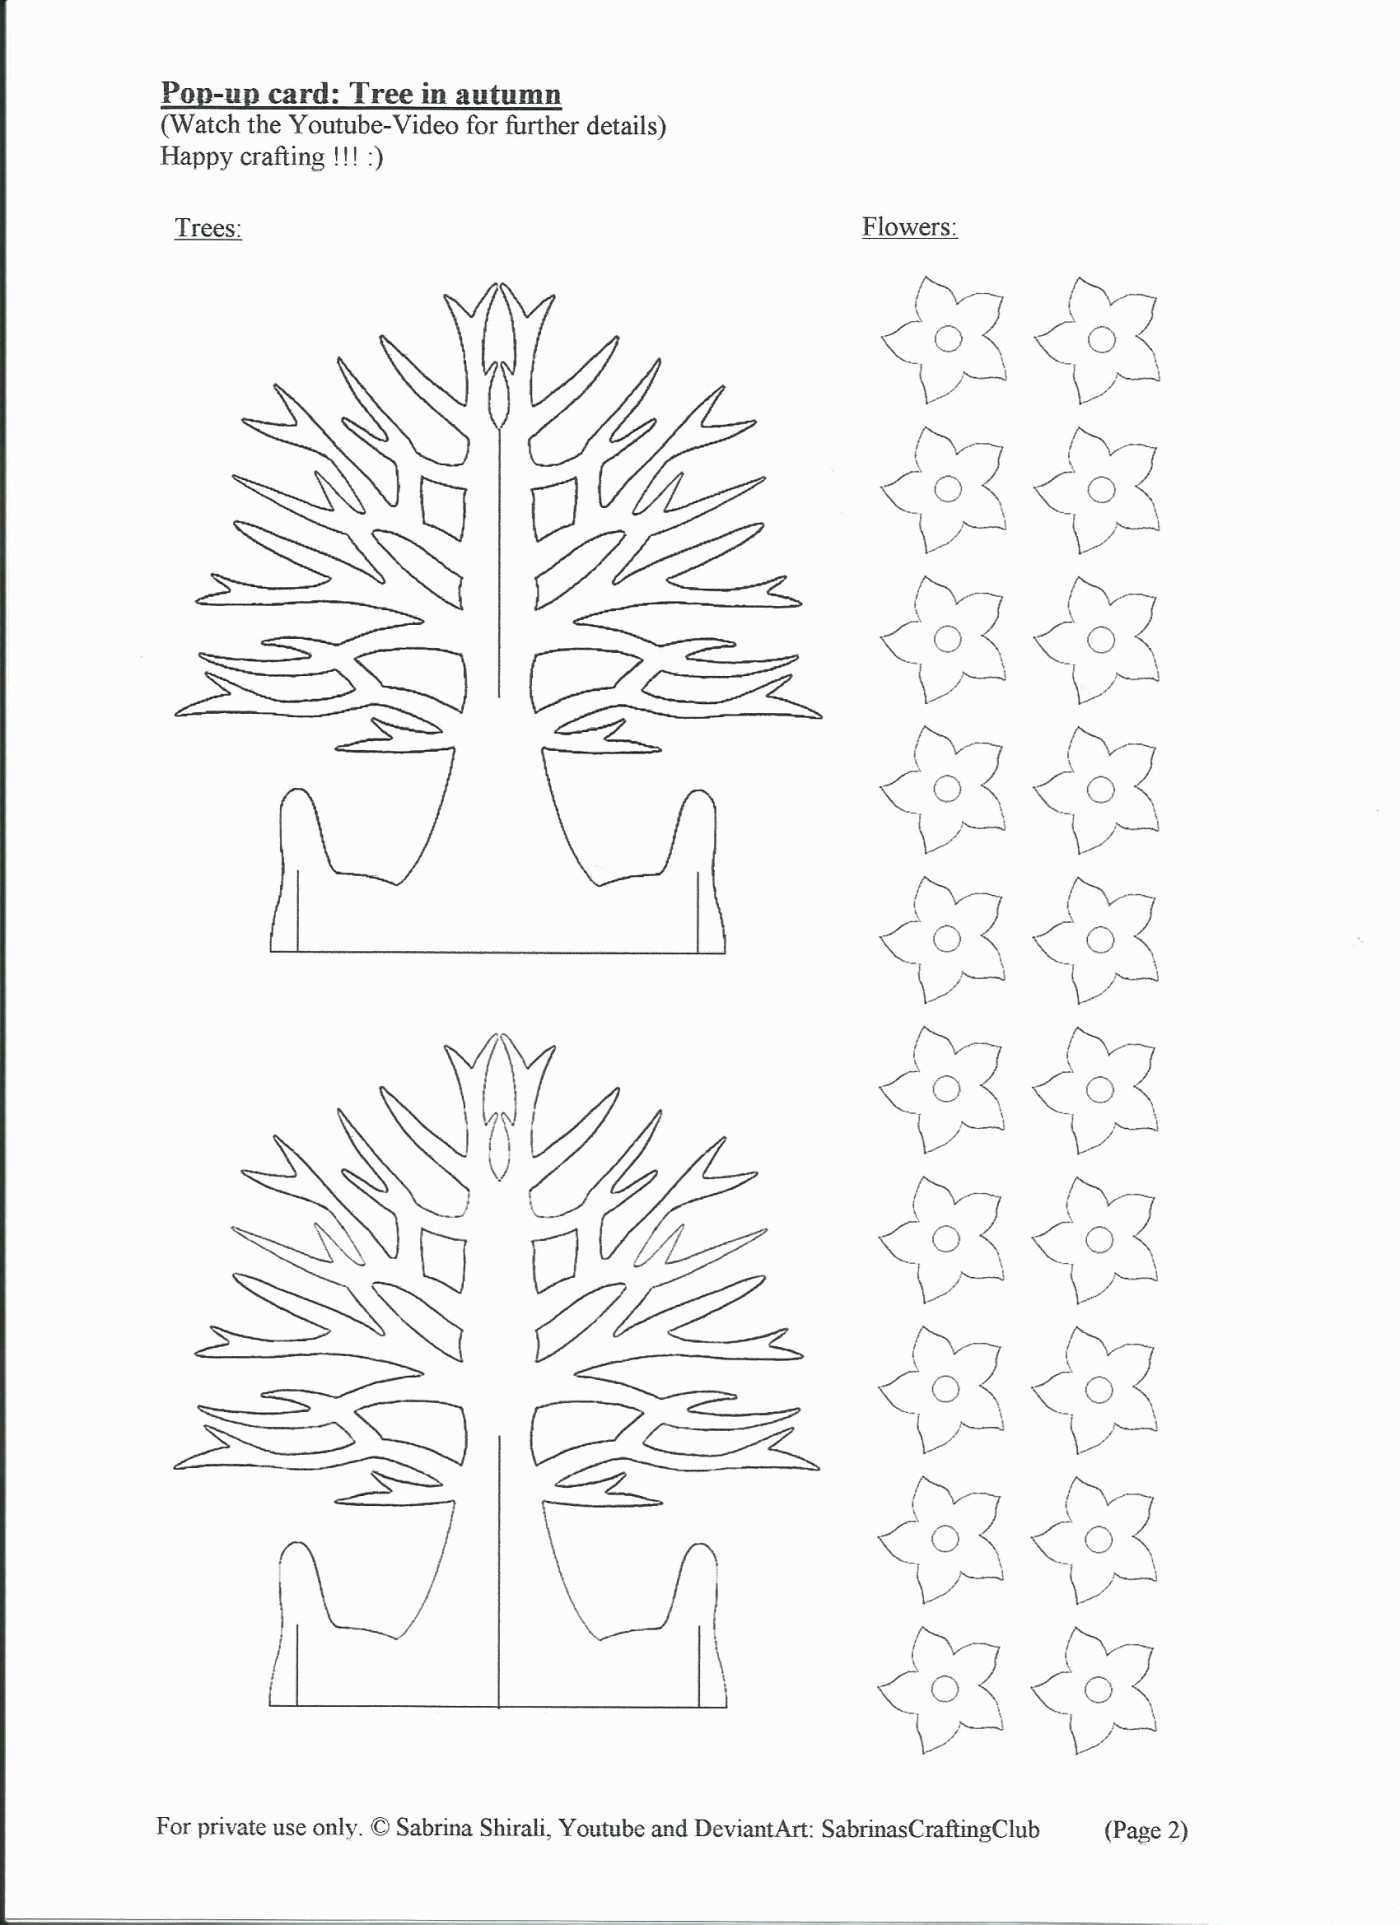 72 Free Printable Pop Up Card Templates Tree For Freepop In Pop Up Tree Card Template